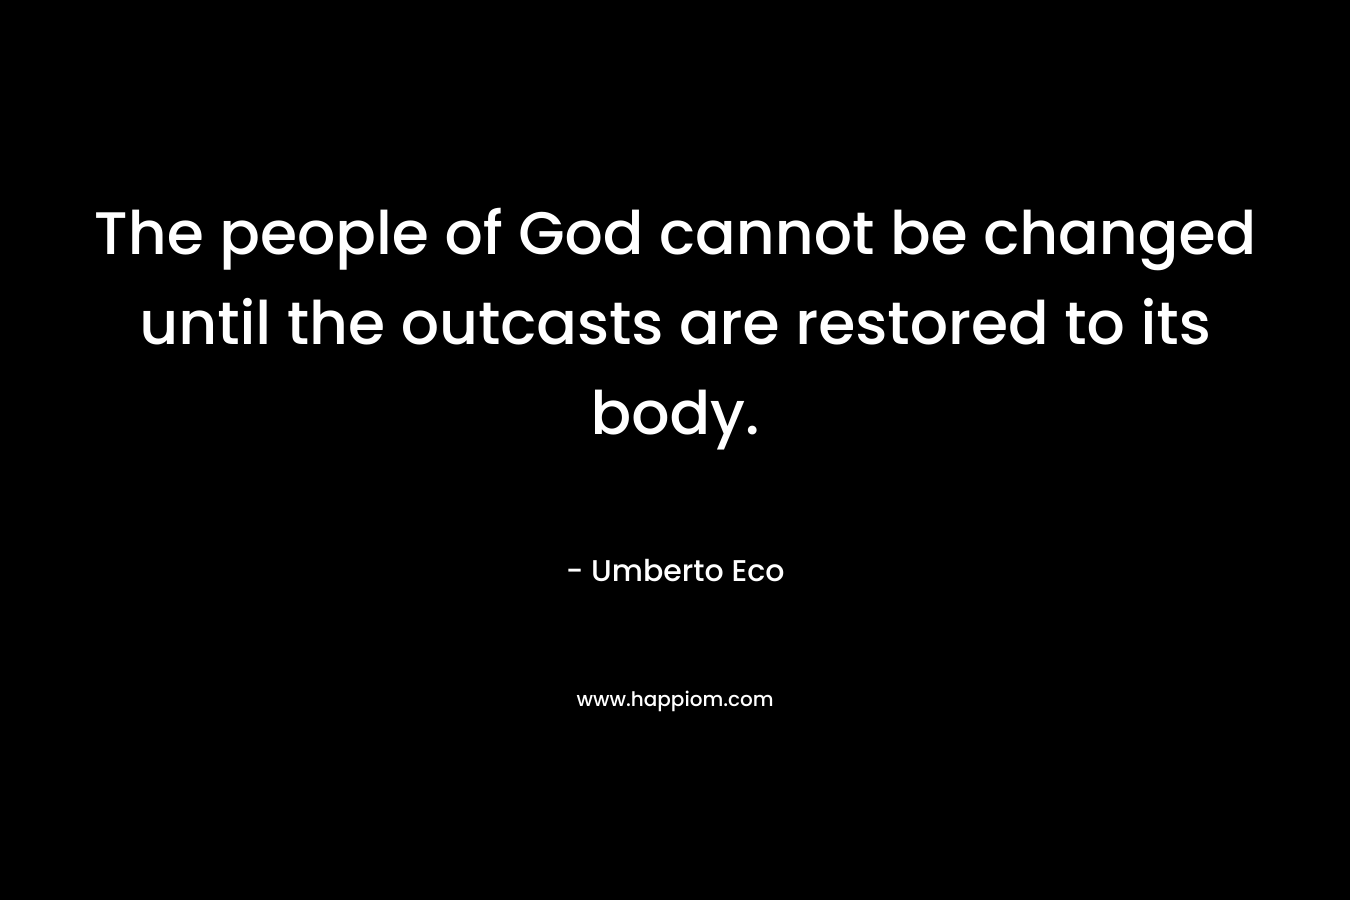 The people of God cannot be changed until the outcasts are restored to its body. – Umberto Eco